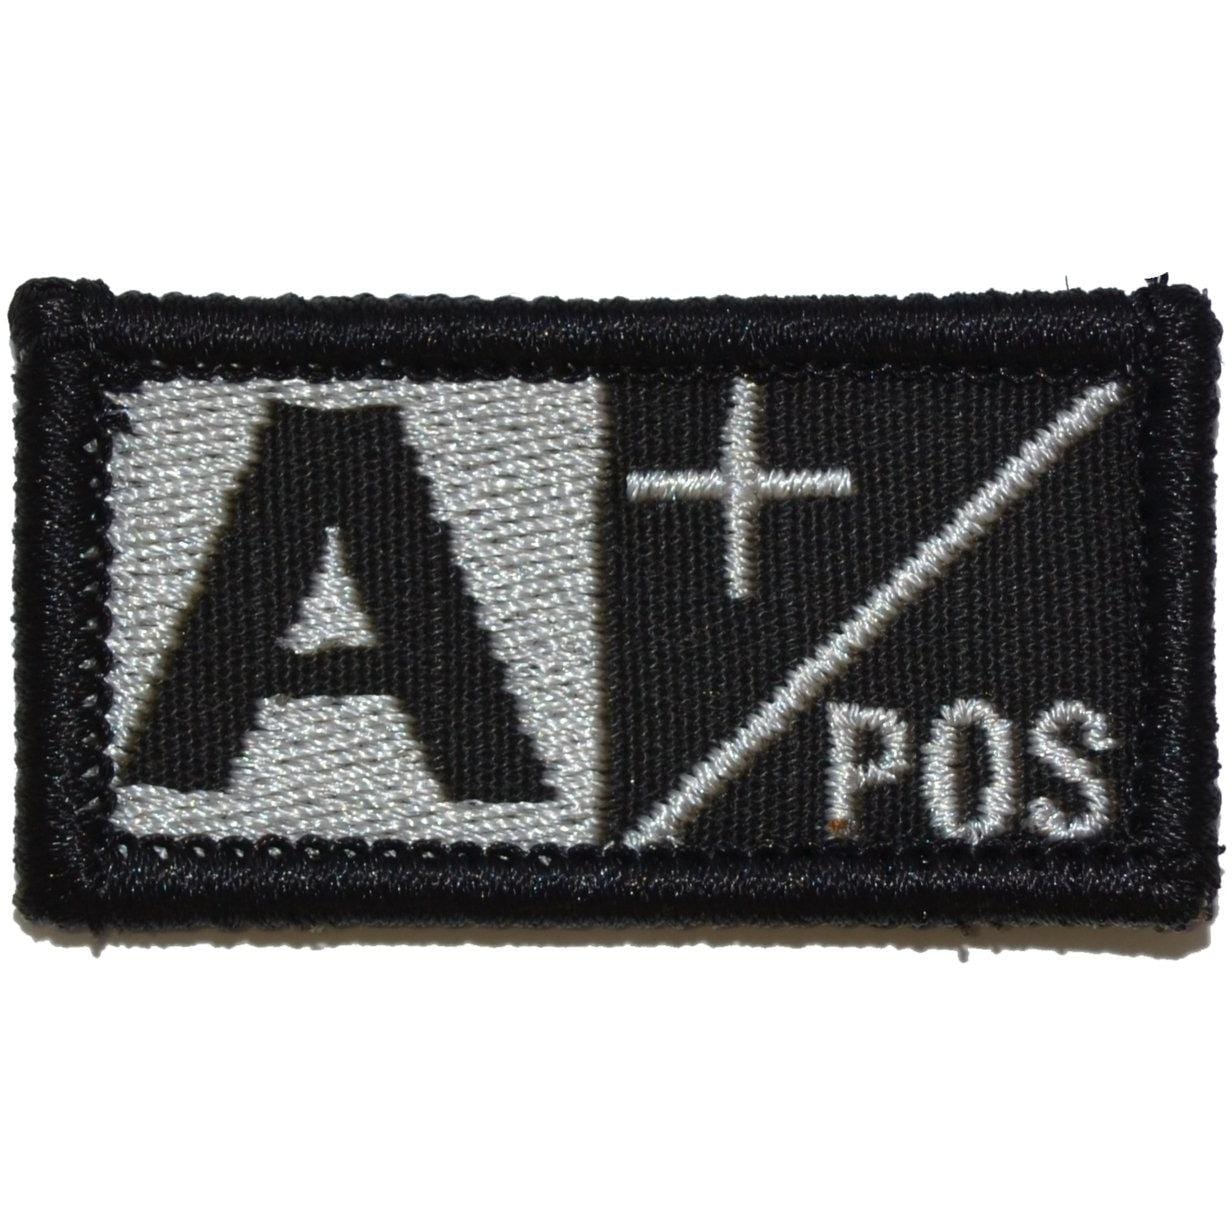 Tactical Gear Junkie Patches Black Blood Type - 1x2 Patch